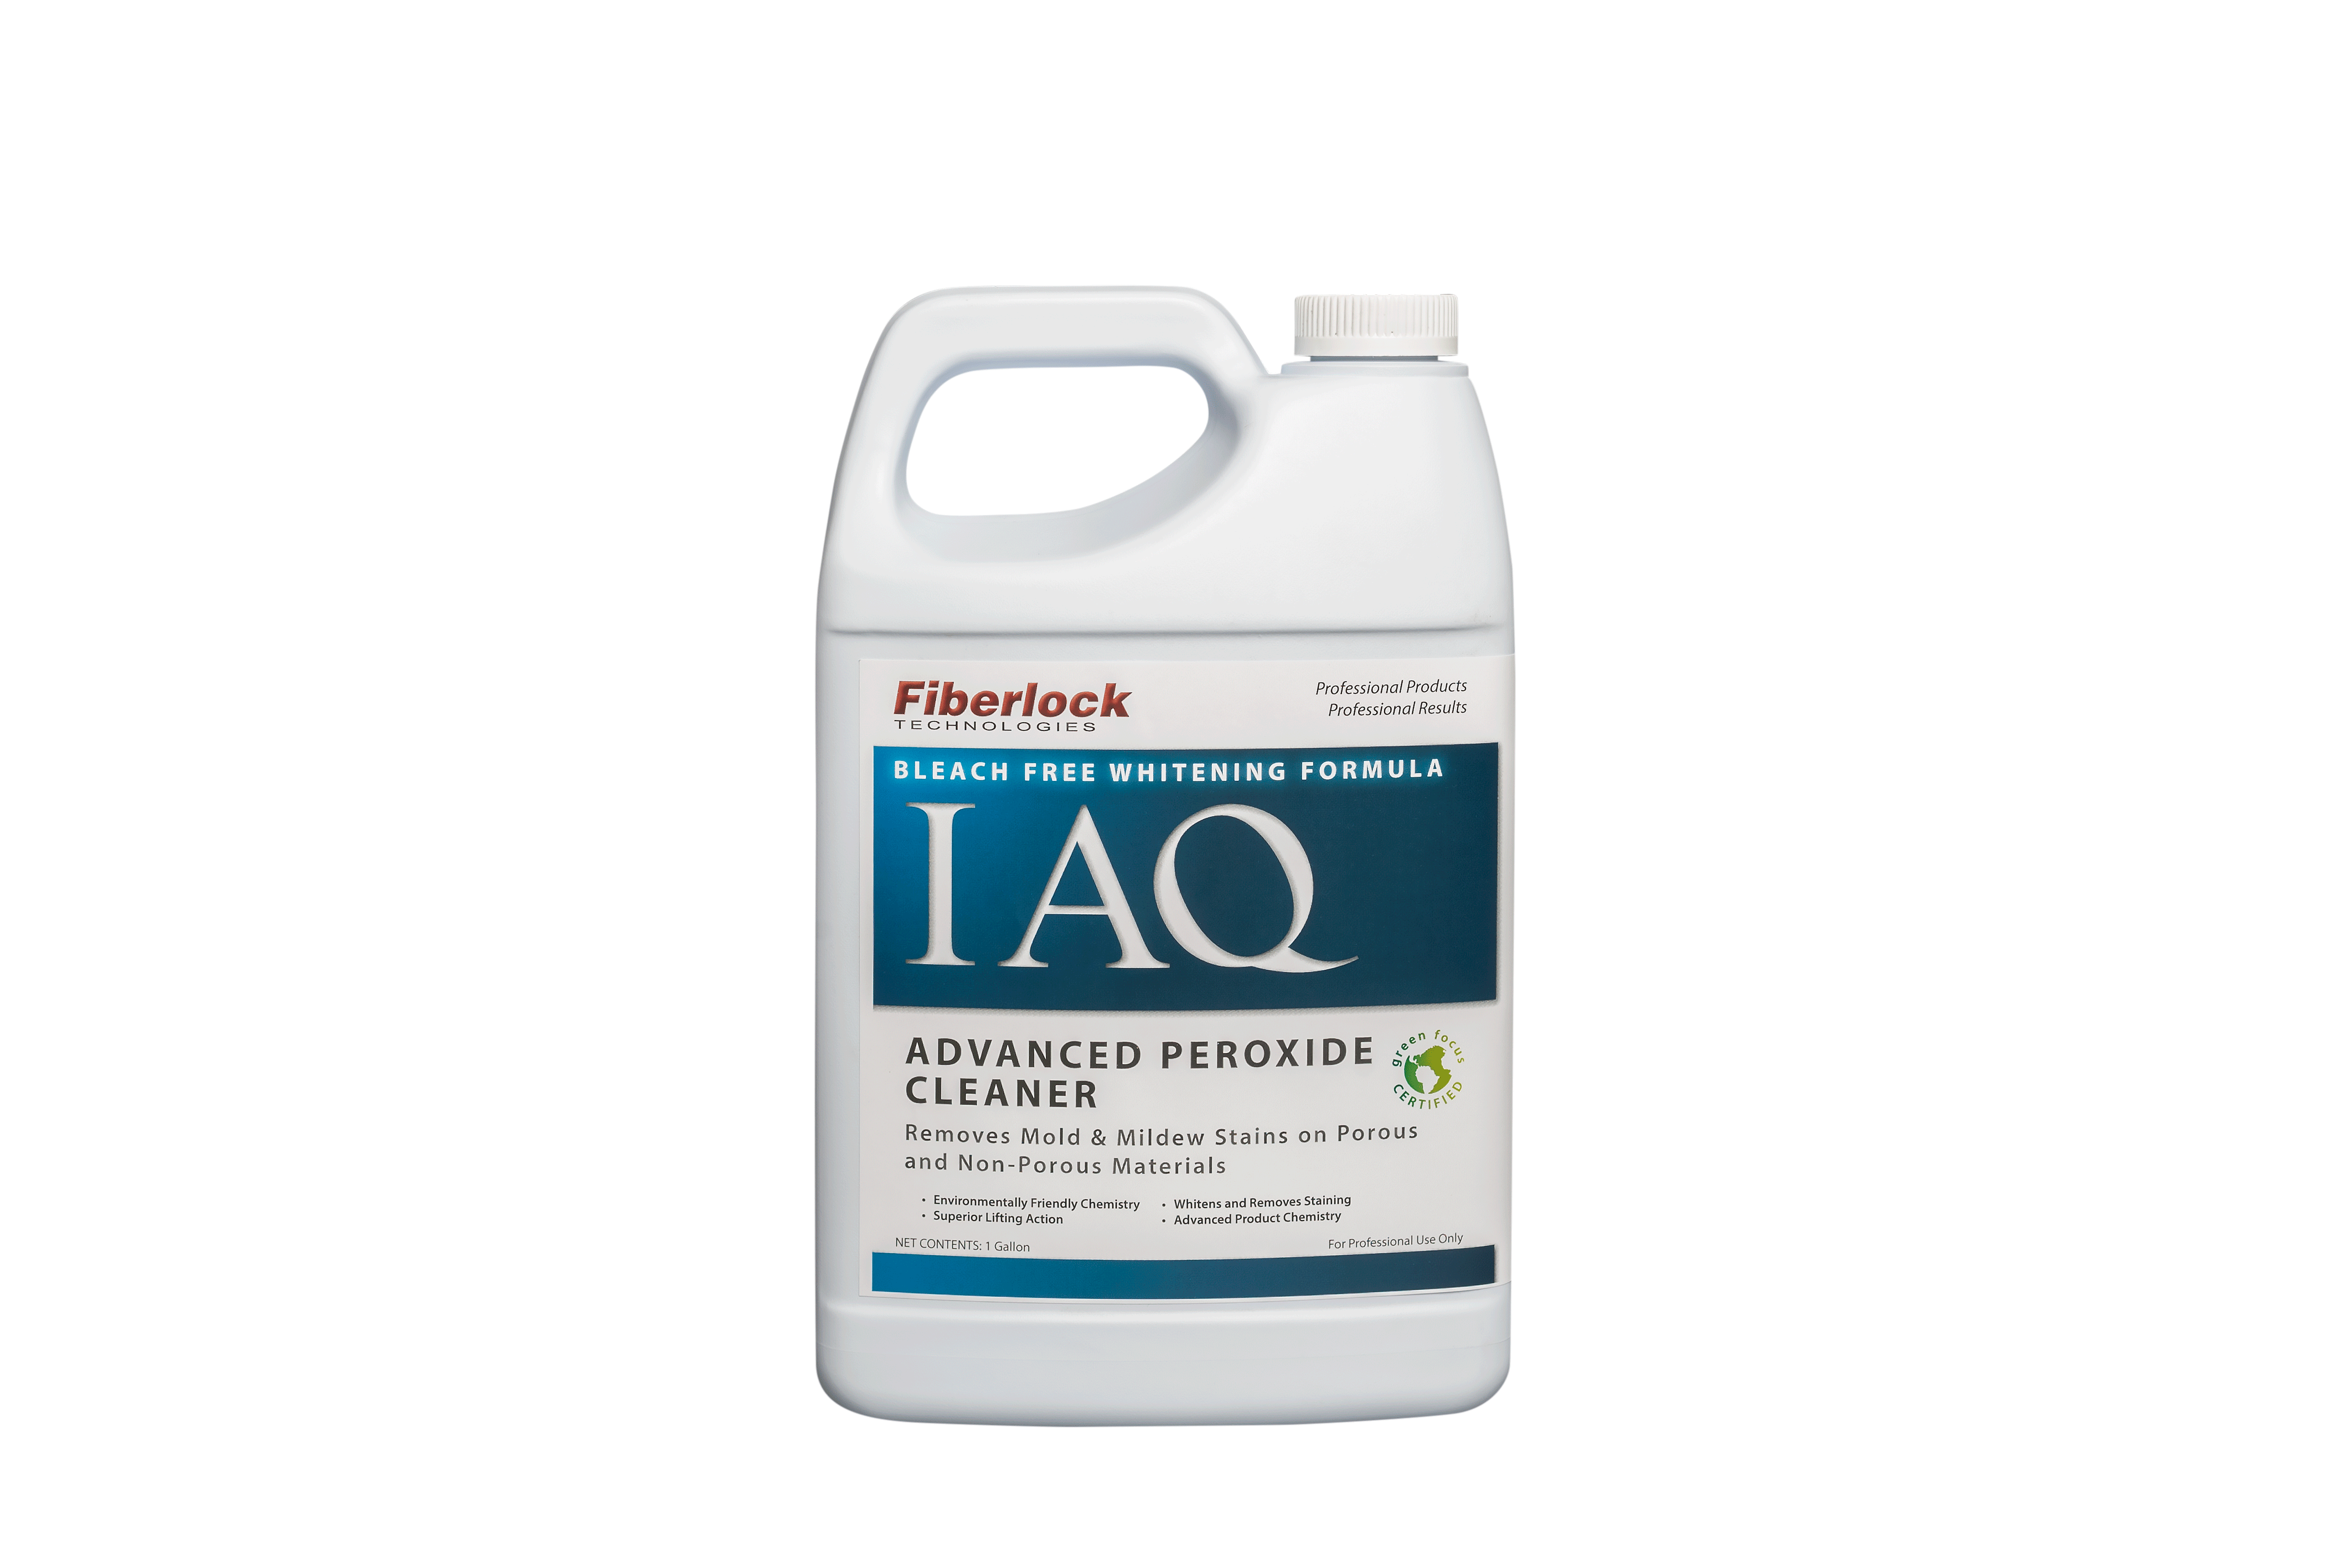 Advanced Peroxide Cleaner produces a high foaming